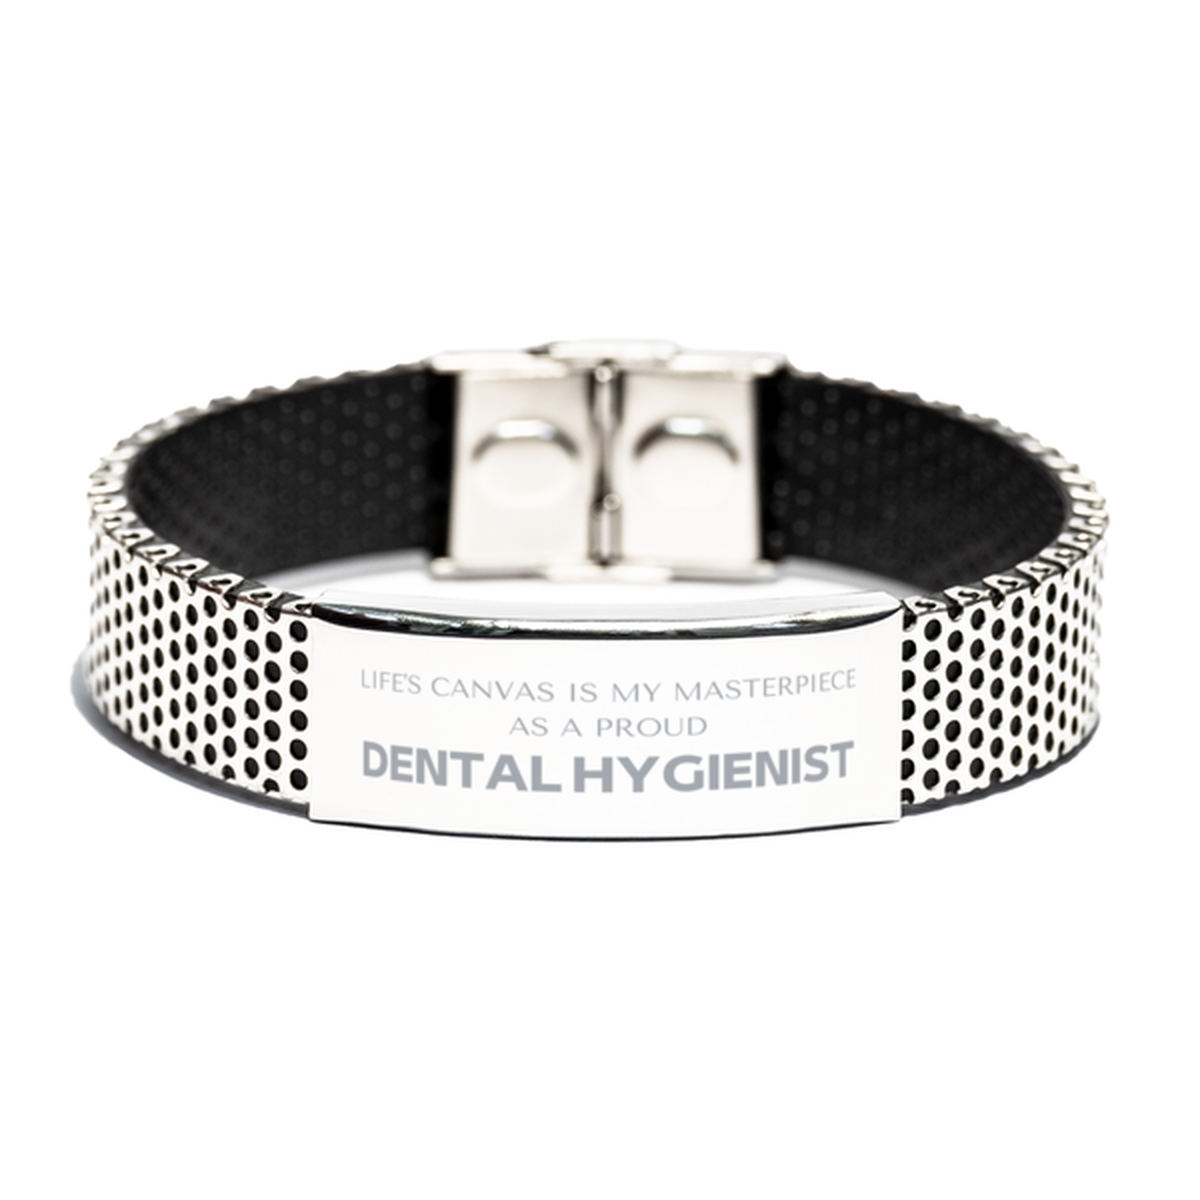 Proud Dental Hygienist Gifts, Life's canvas is my masterpiece, Epic Birthday Christmas Unique Stainless Steel Bracelet For Dental Hygienist, Coworkers, Men, Women, Friends